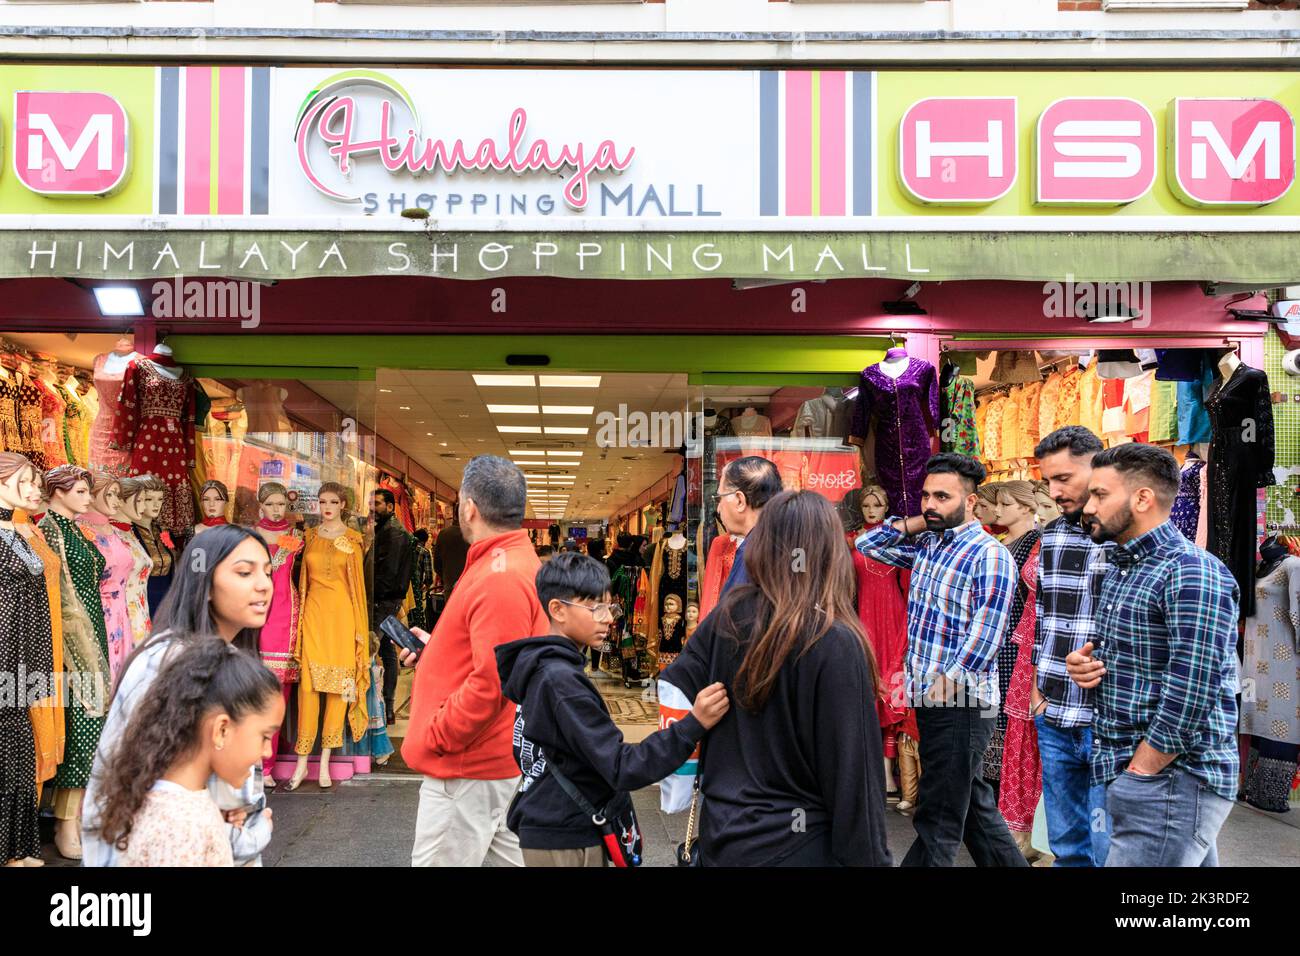 Himalaya Shopping Mall. Punjabi, Indian and Asian shops and people shopping in Southall High Street, Southall, West London, England, UK Stock Photo